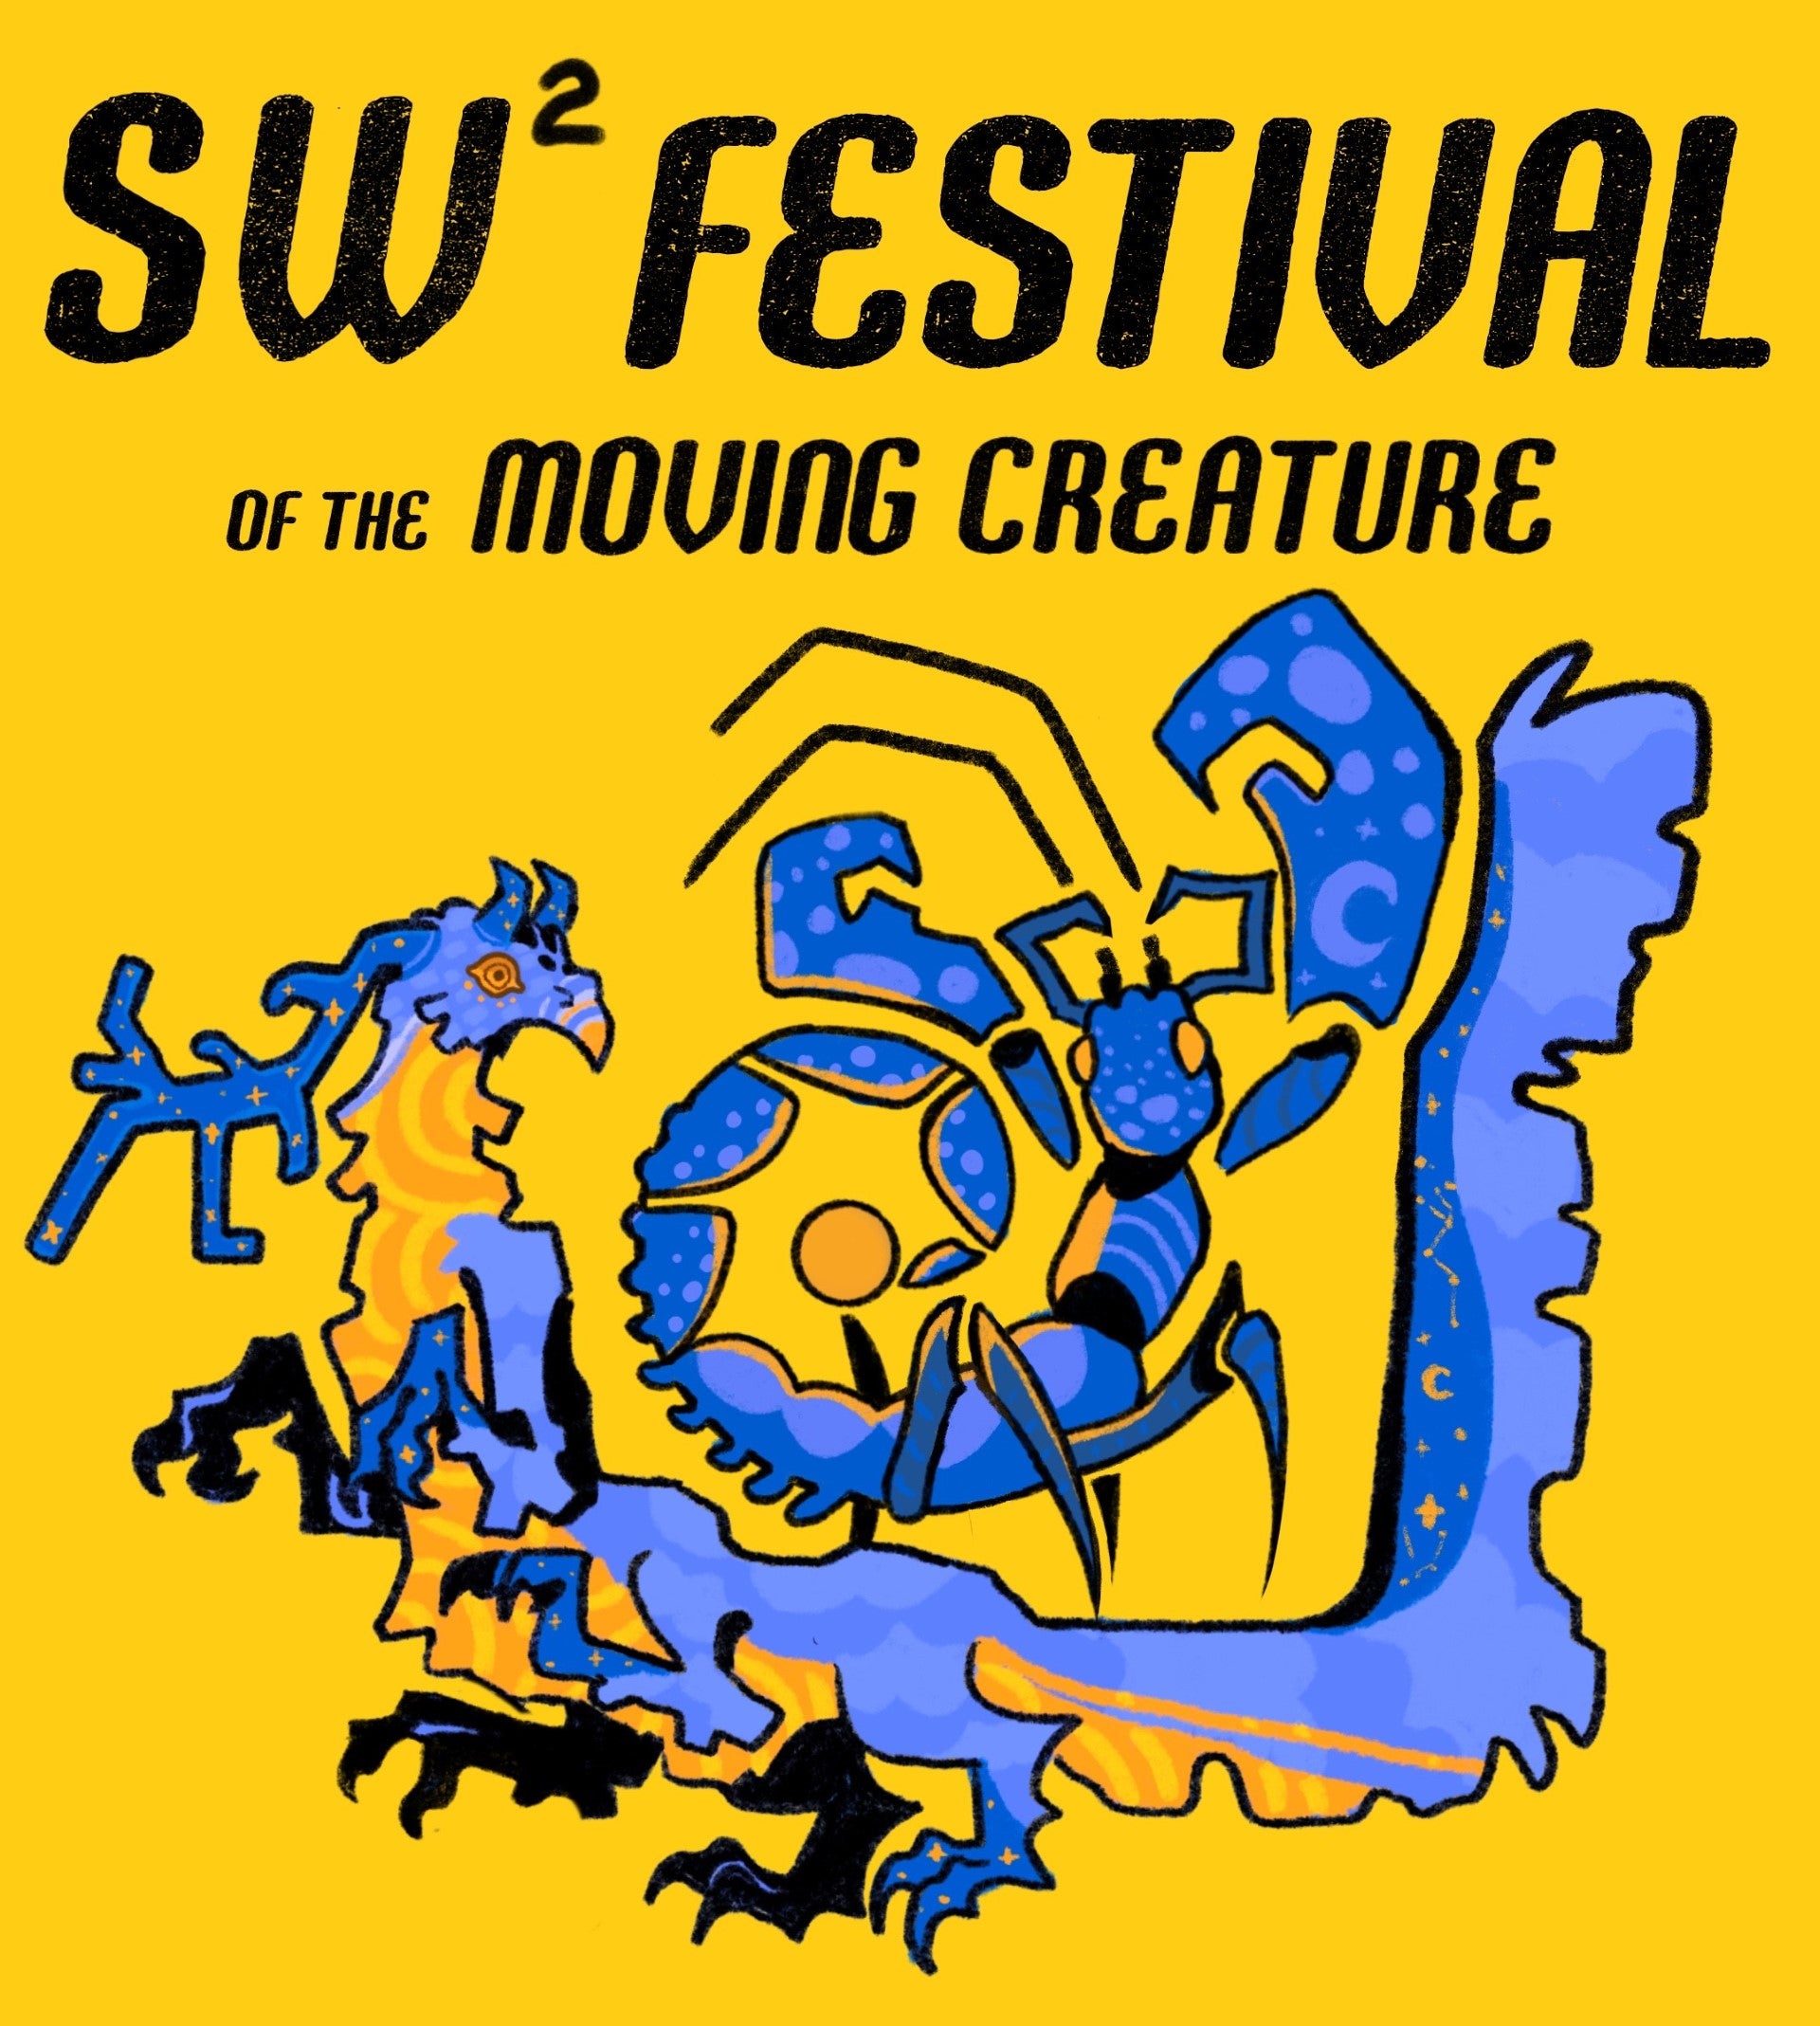 Stan Winston and Steve Warner Festival of the Moving Creature Promo Image